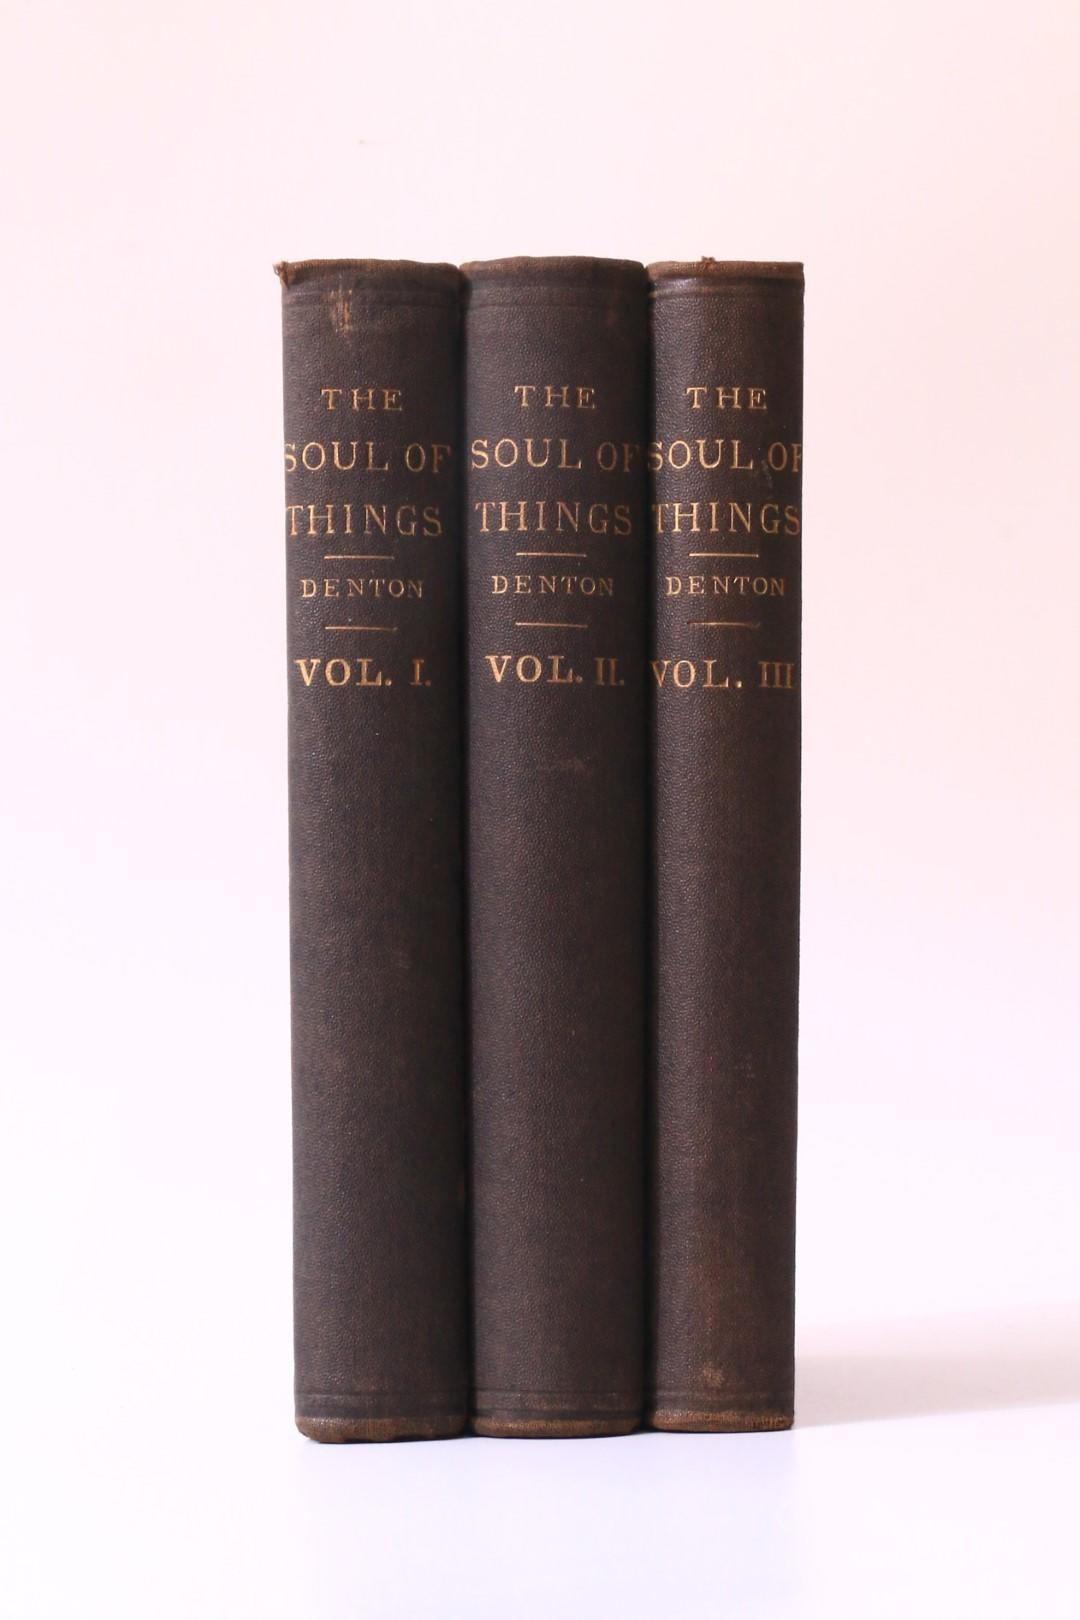 William and Elizabeth Denton - The Soul of Things, or, Psychometric Researches and Discoveries [Gustav Meyrink's Copy] - Denton Publishing Company, 1888, Later Edition.